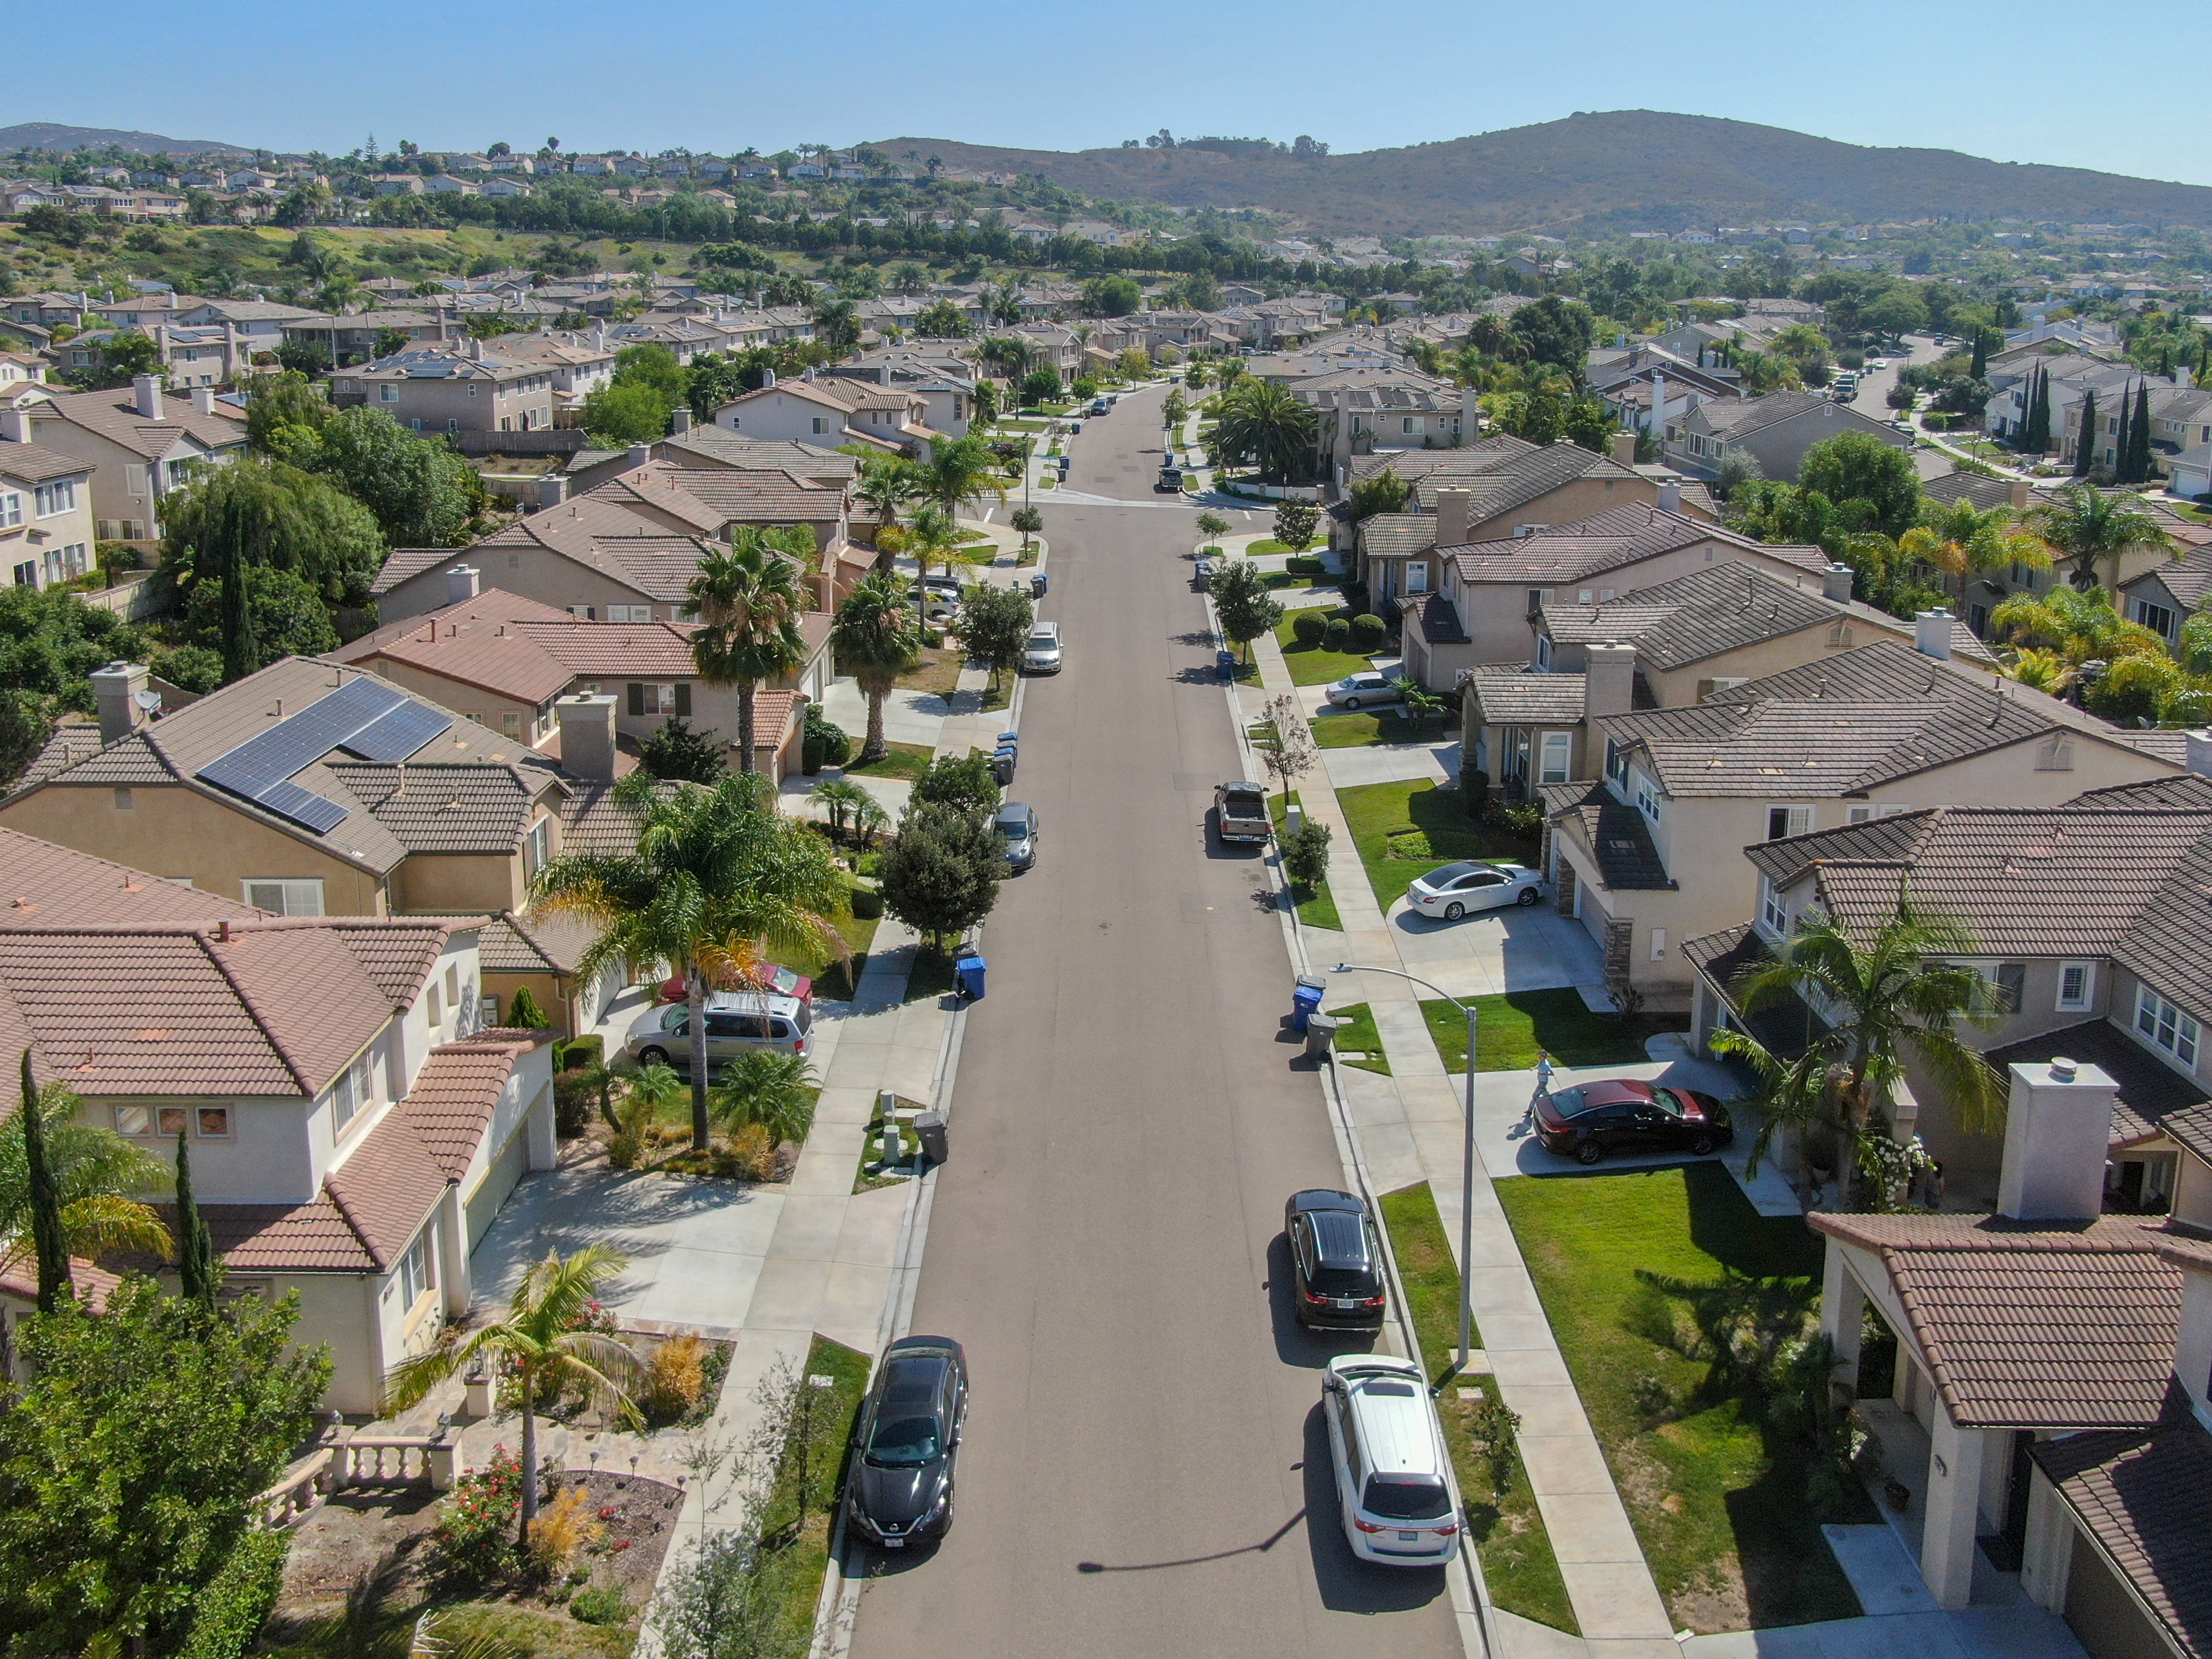 Suburban neighborhood street with big villas next to each other in southern California. Aerial view of residential modern subdivision house.